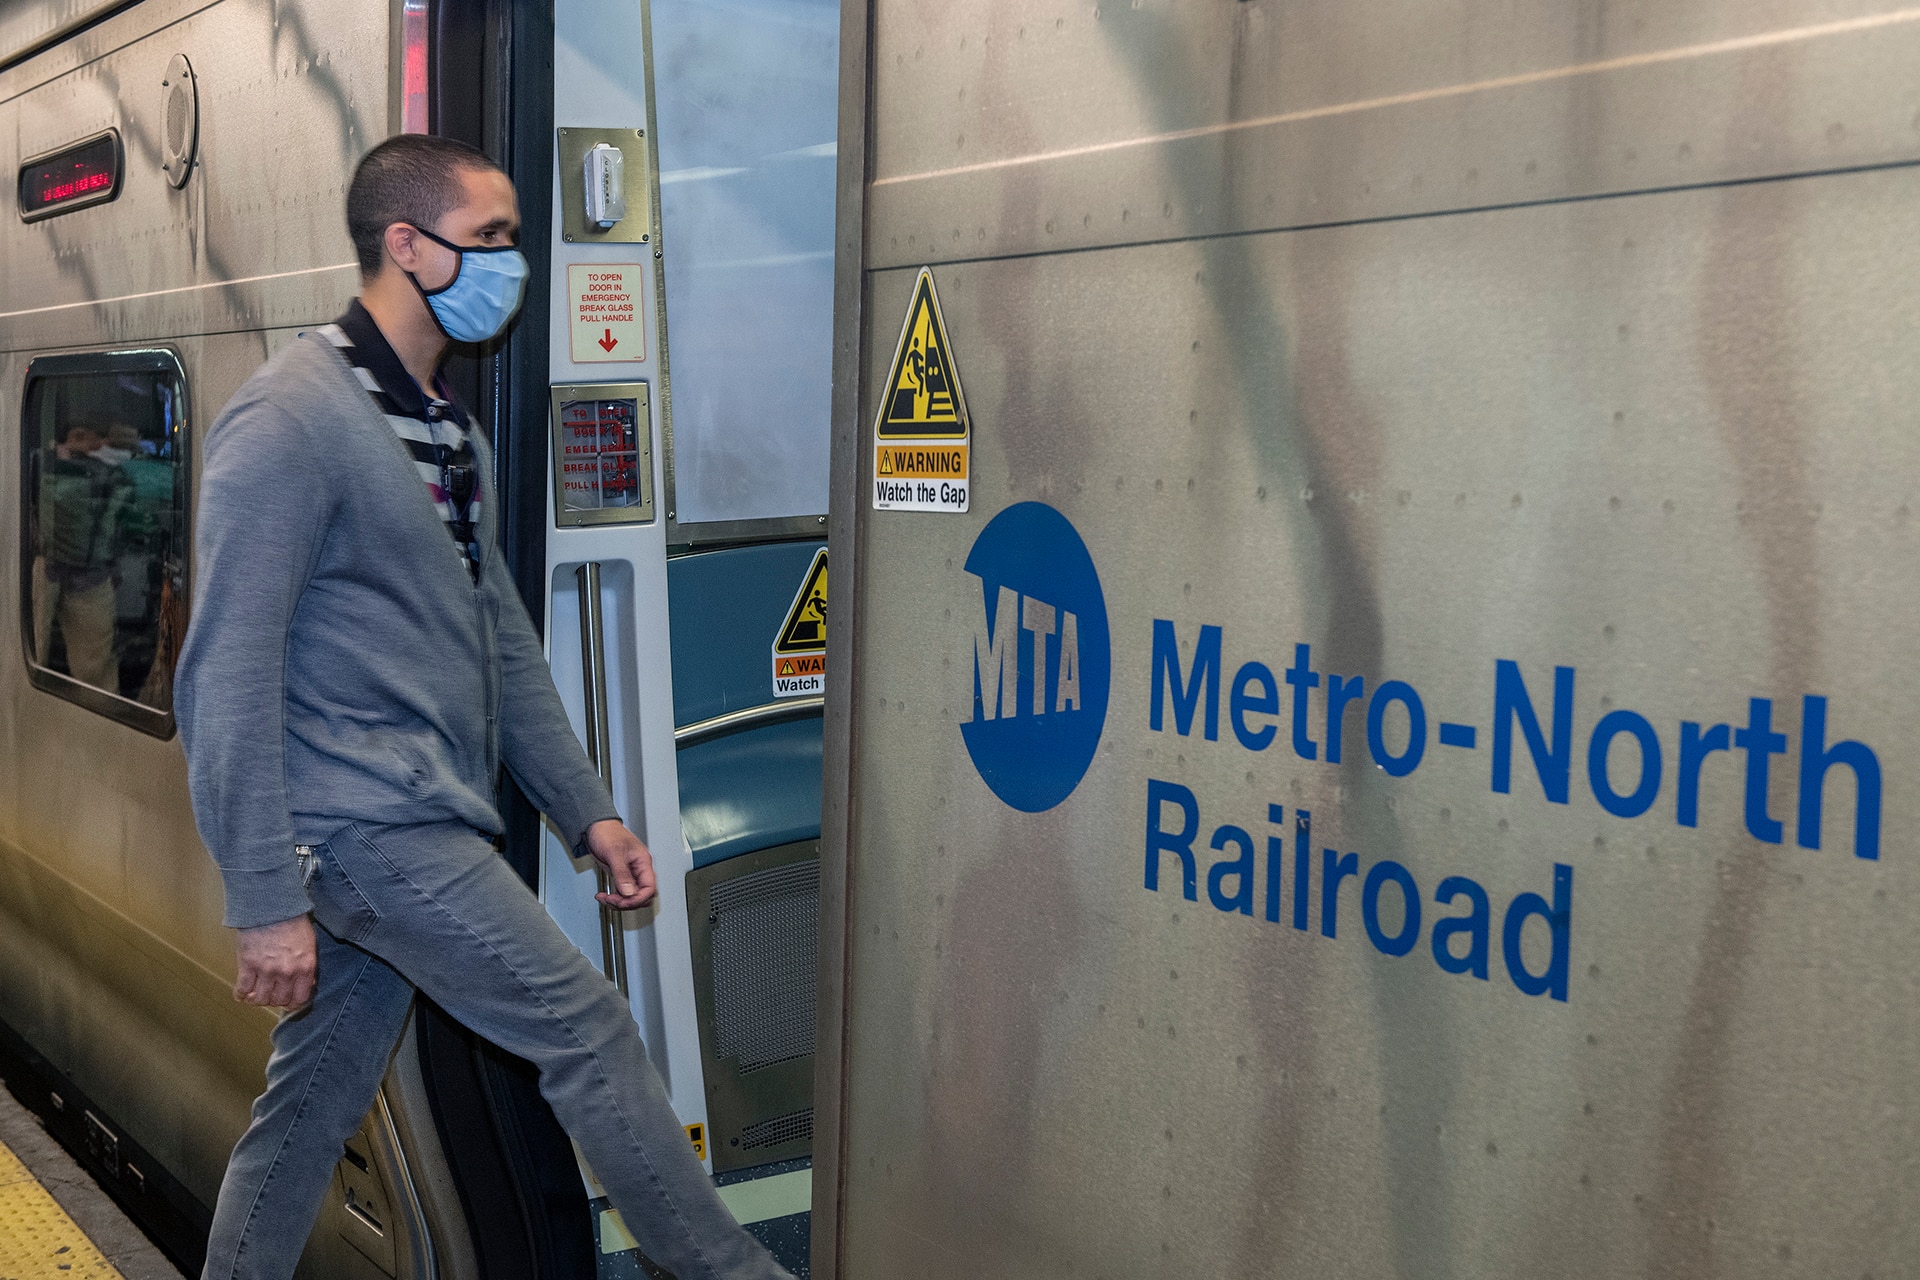 Metro-North Railroad Announces Restoration of Service on the Danbury and New Canaan Lines Planned for Saturday 